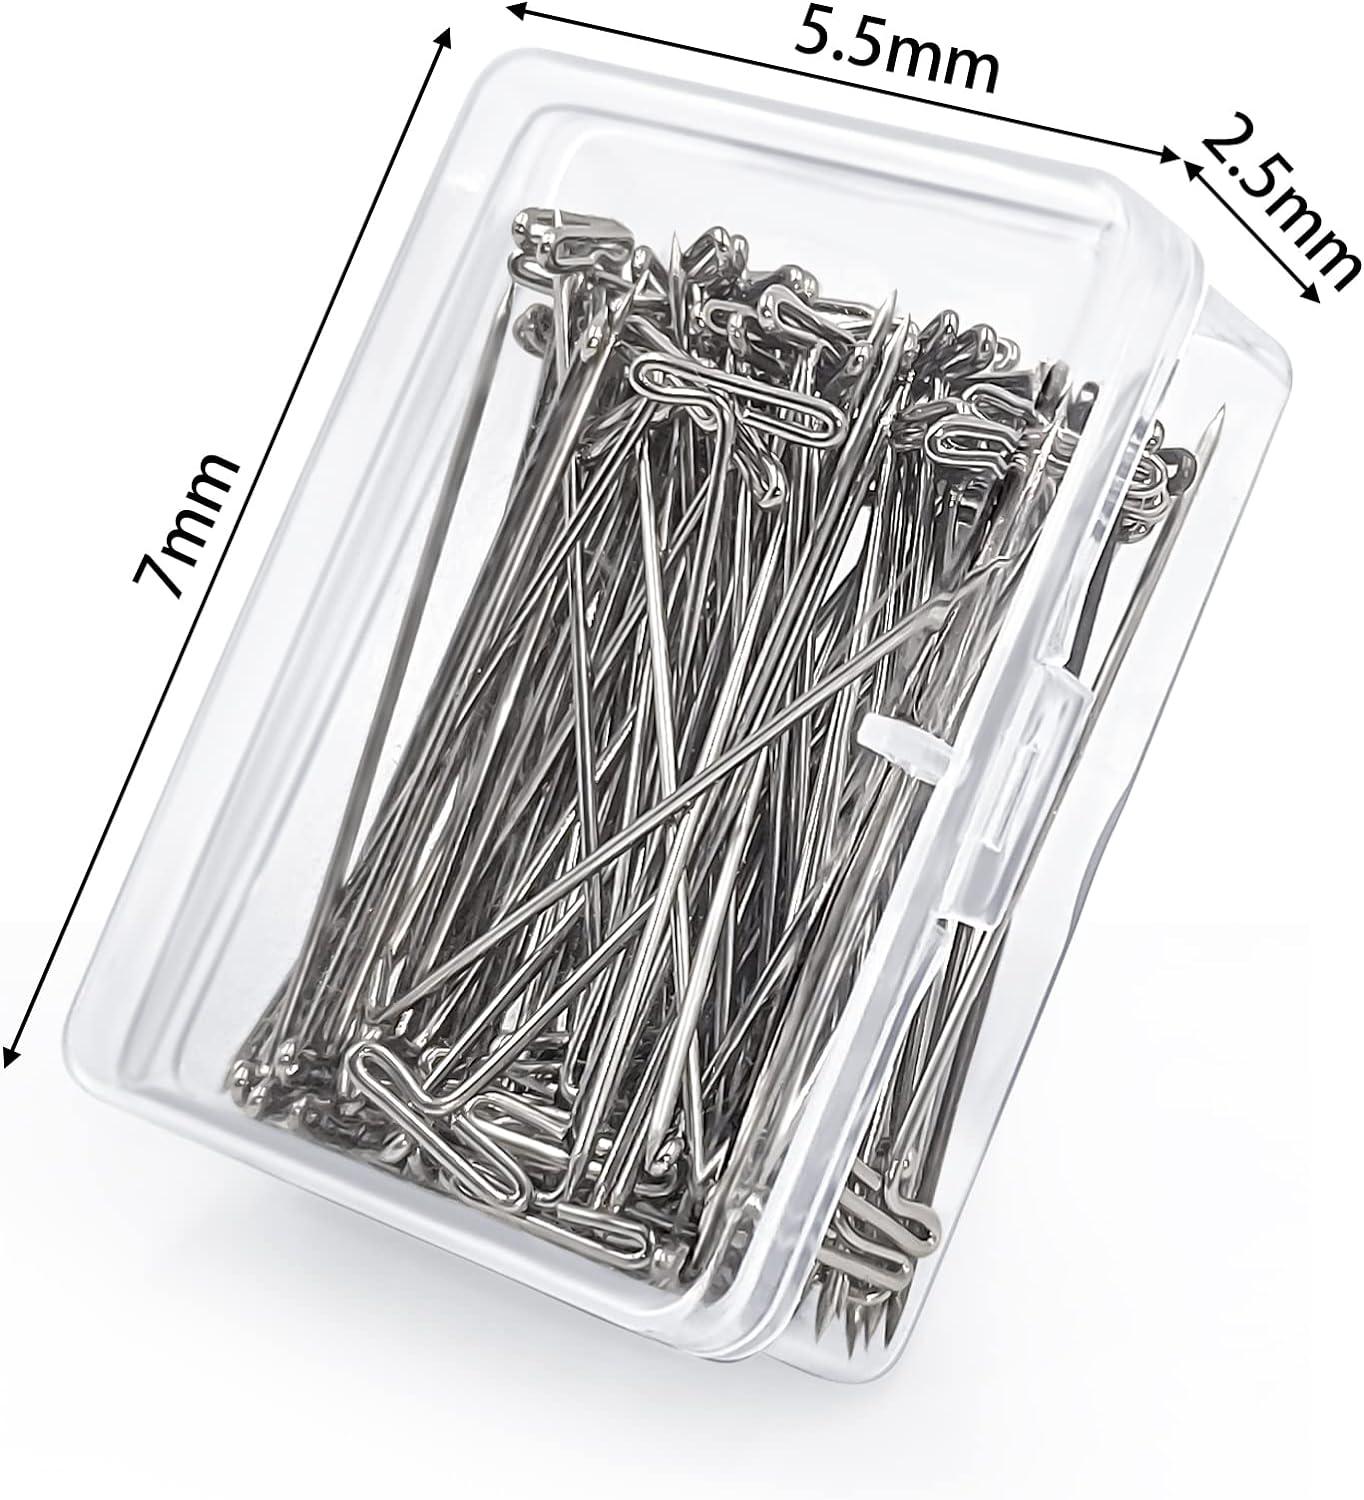  T Pins, Stainless Steel T-pins - Nickel Plated - 300 Pcs (2  Inch) : Office Products